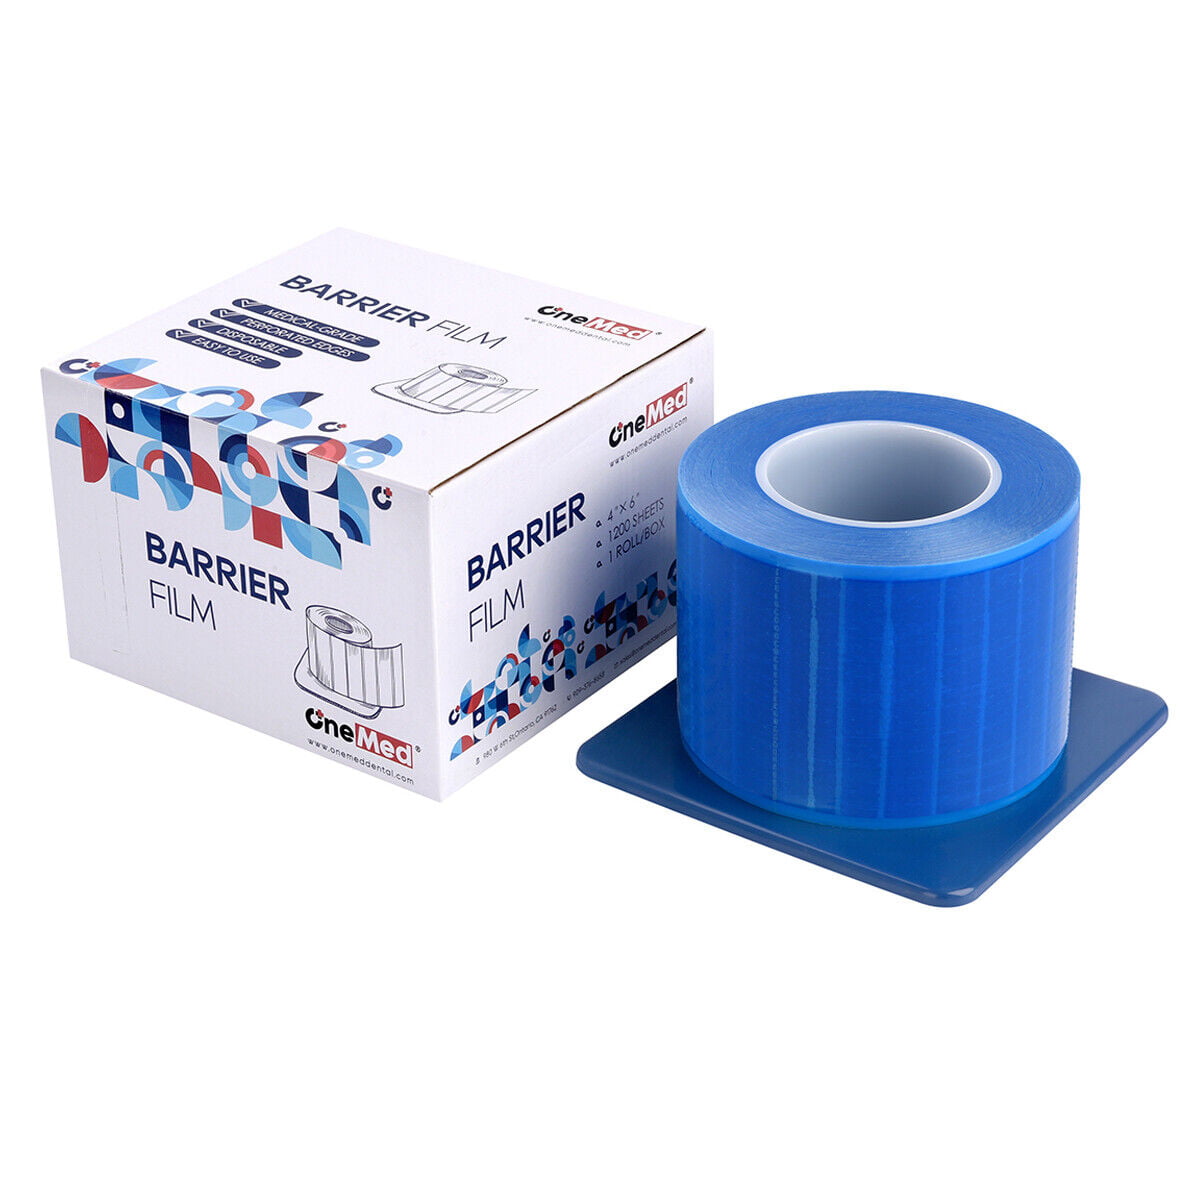 Adhesive Film Roller with polyethylene sheets – Medco